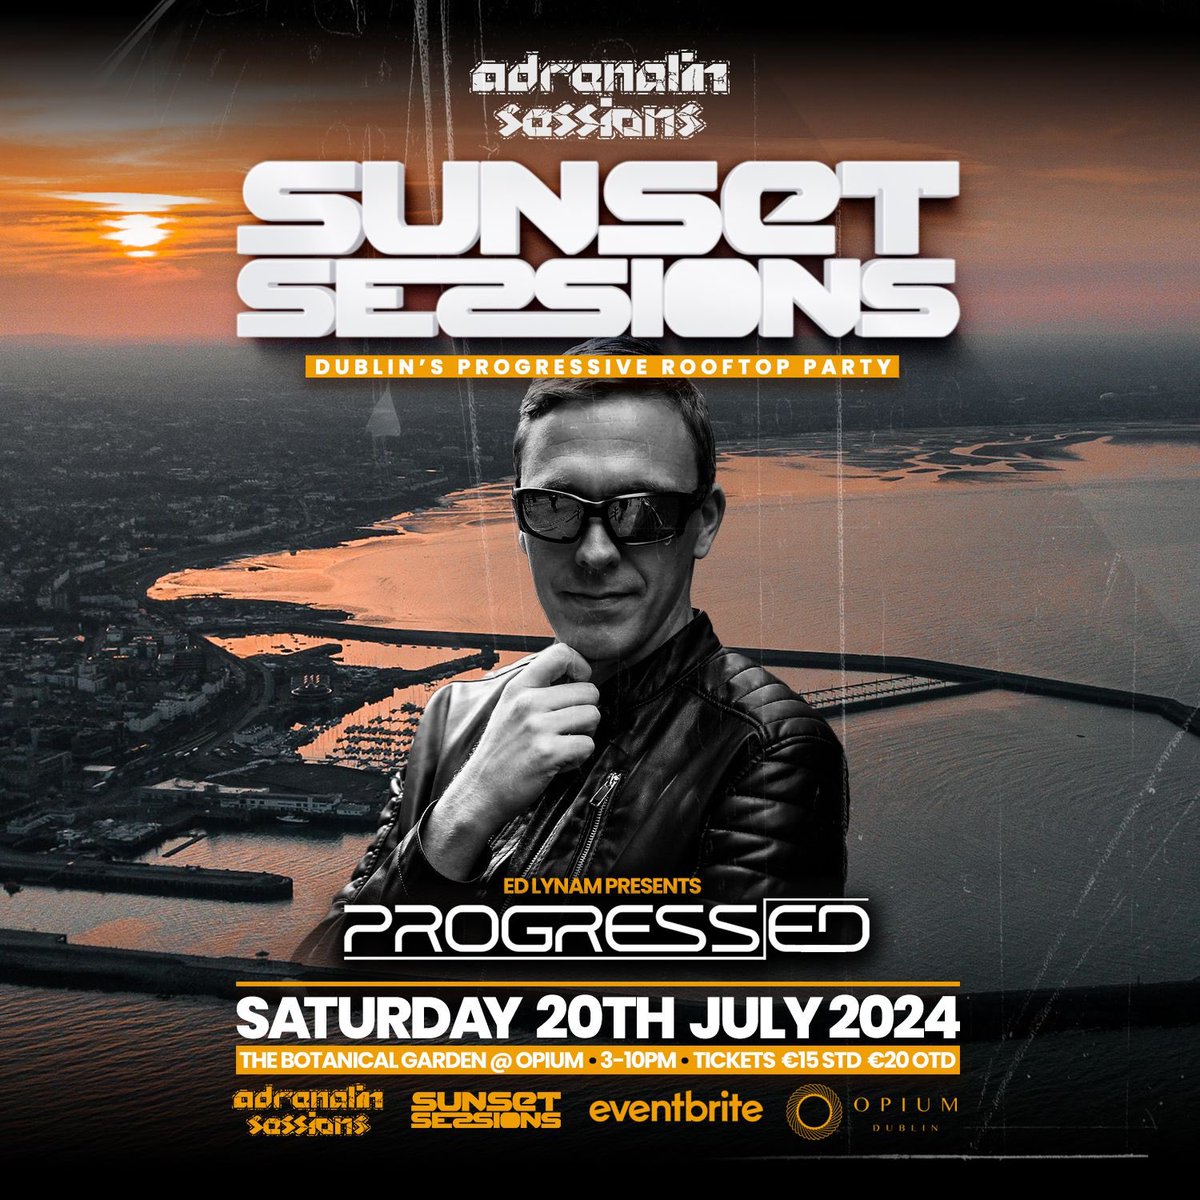 Roll on 20th July! I’m back as my alias “ProgressEd” and have some new prog tracks to play out too! 

Sunset Sessions, @OpiumDublin #progressive #proghouse #trancefamily